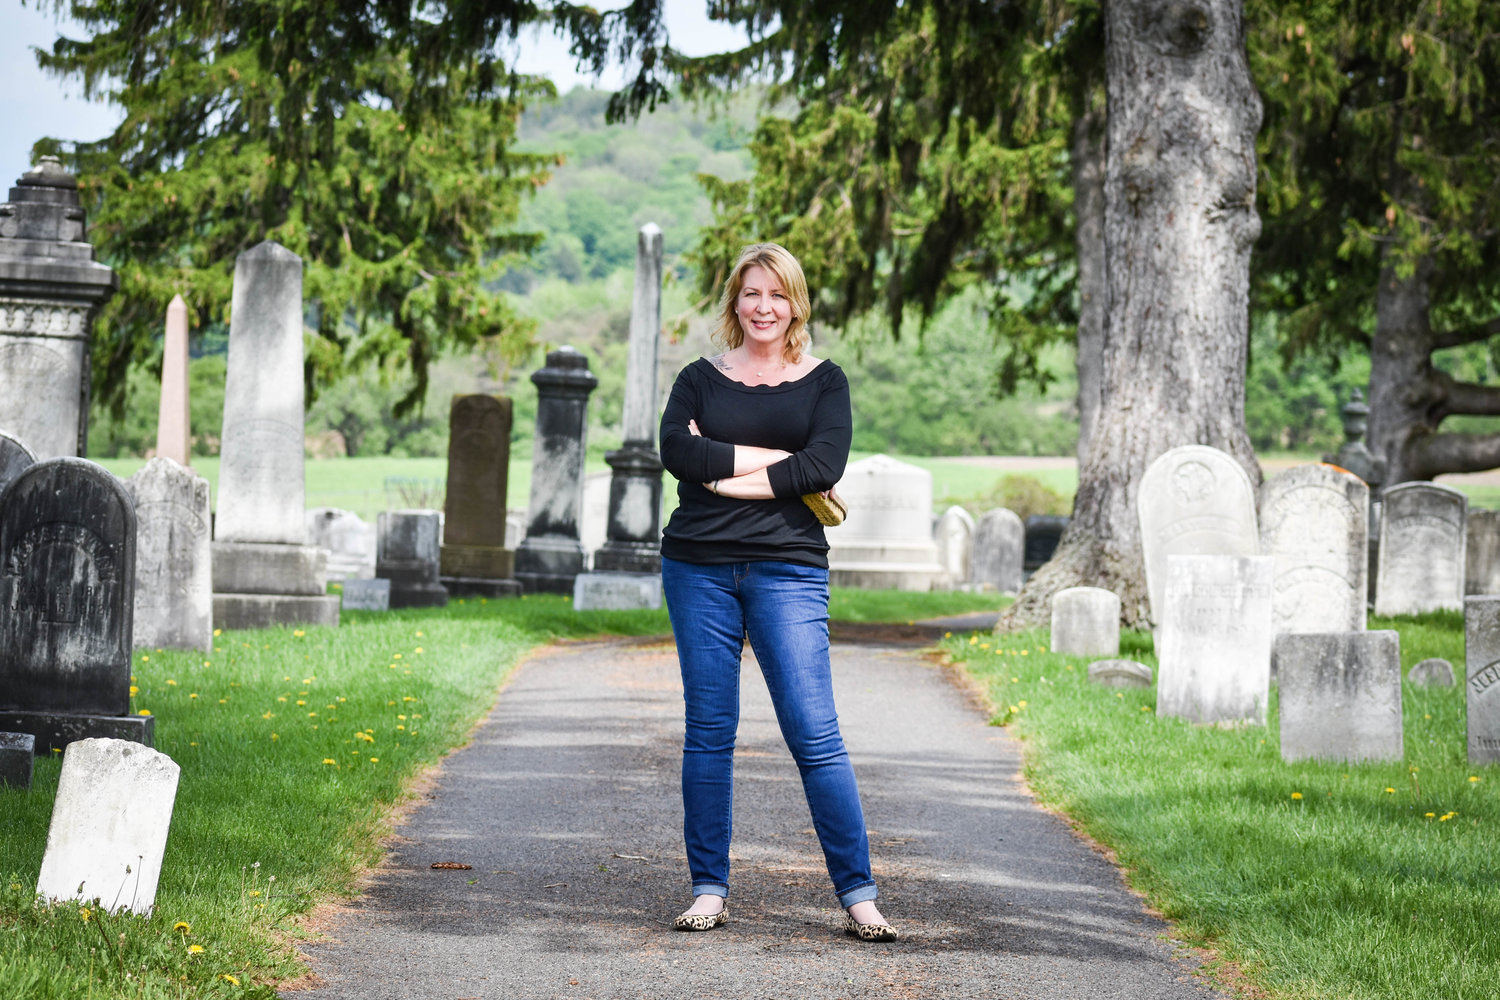 Madison Village Cemetery is one of many cemeteries in CNY that Megan Barnes has visited to clean up gravestones.